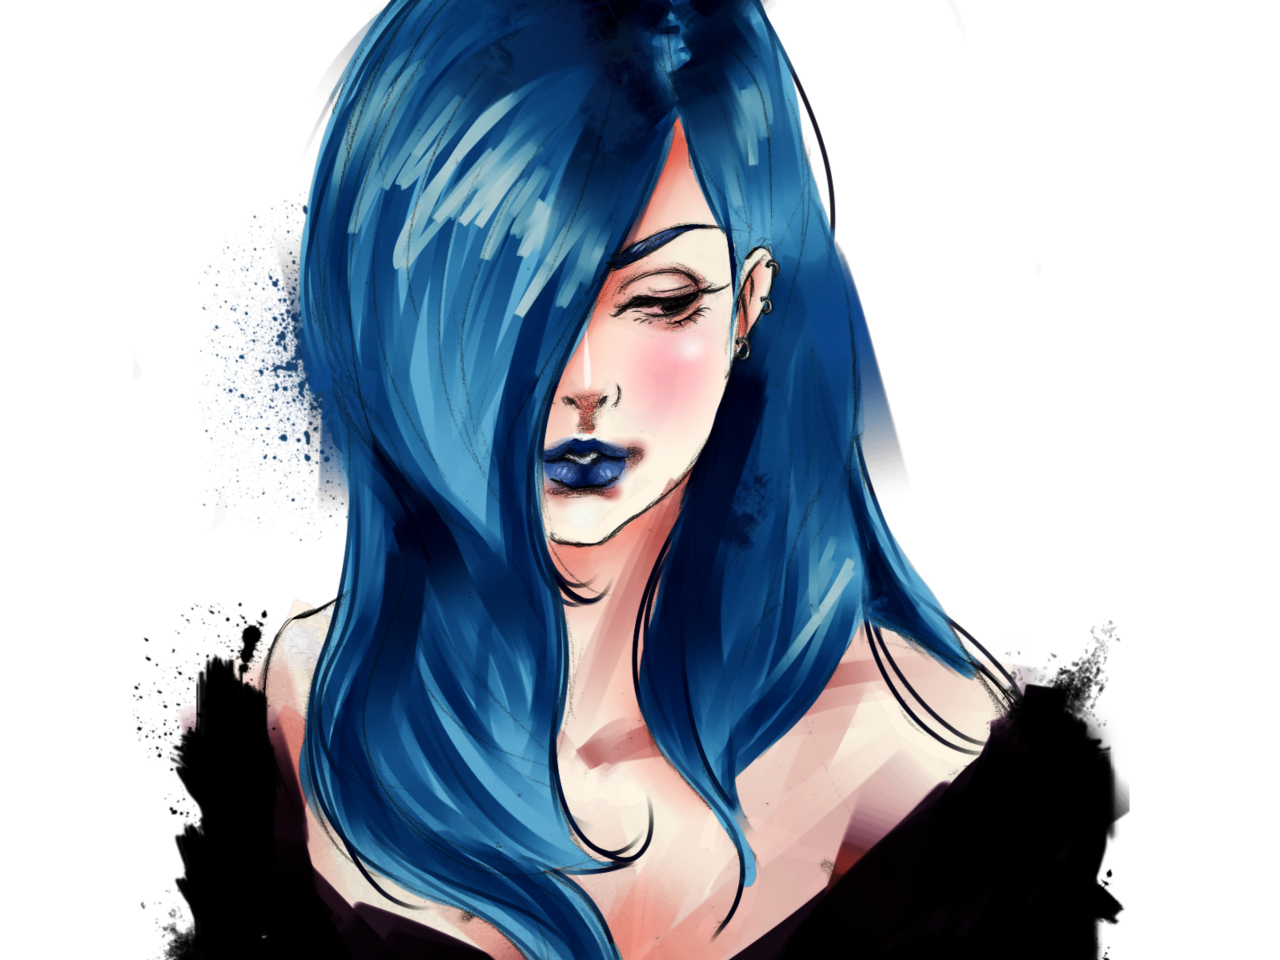 Das Girl With Blue Hair Painting Wallpaper 1280x960